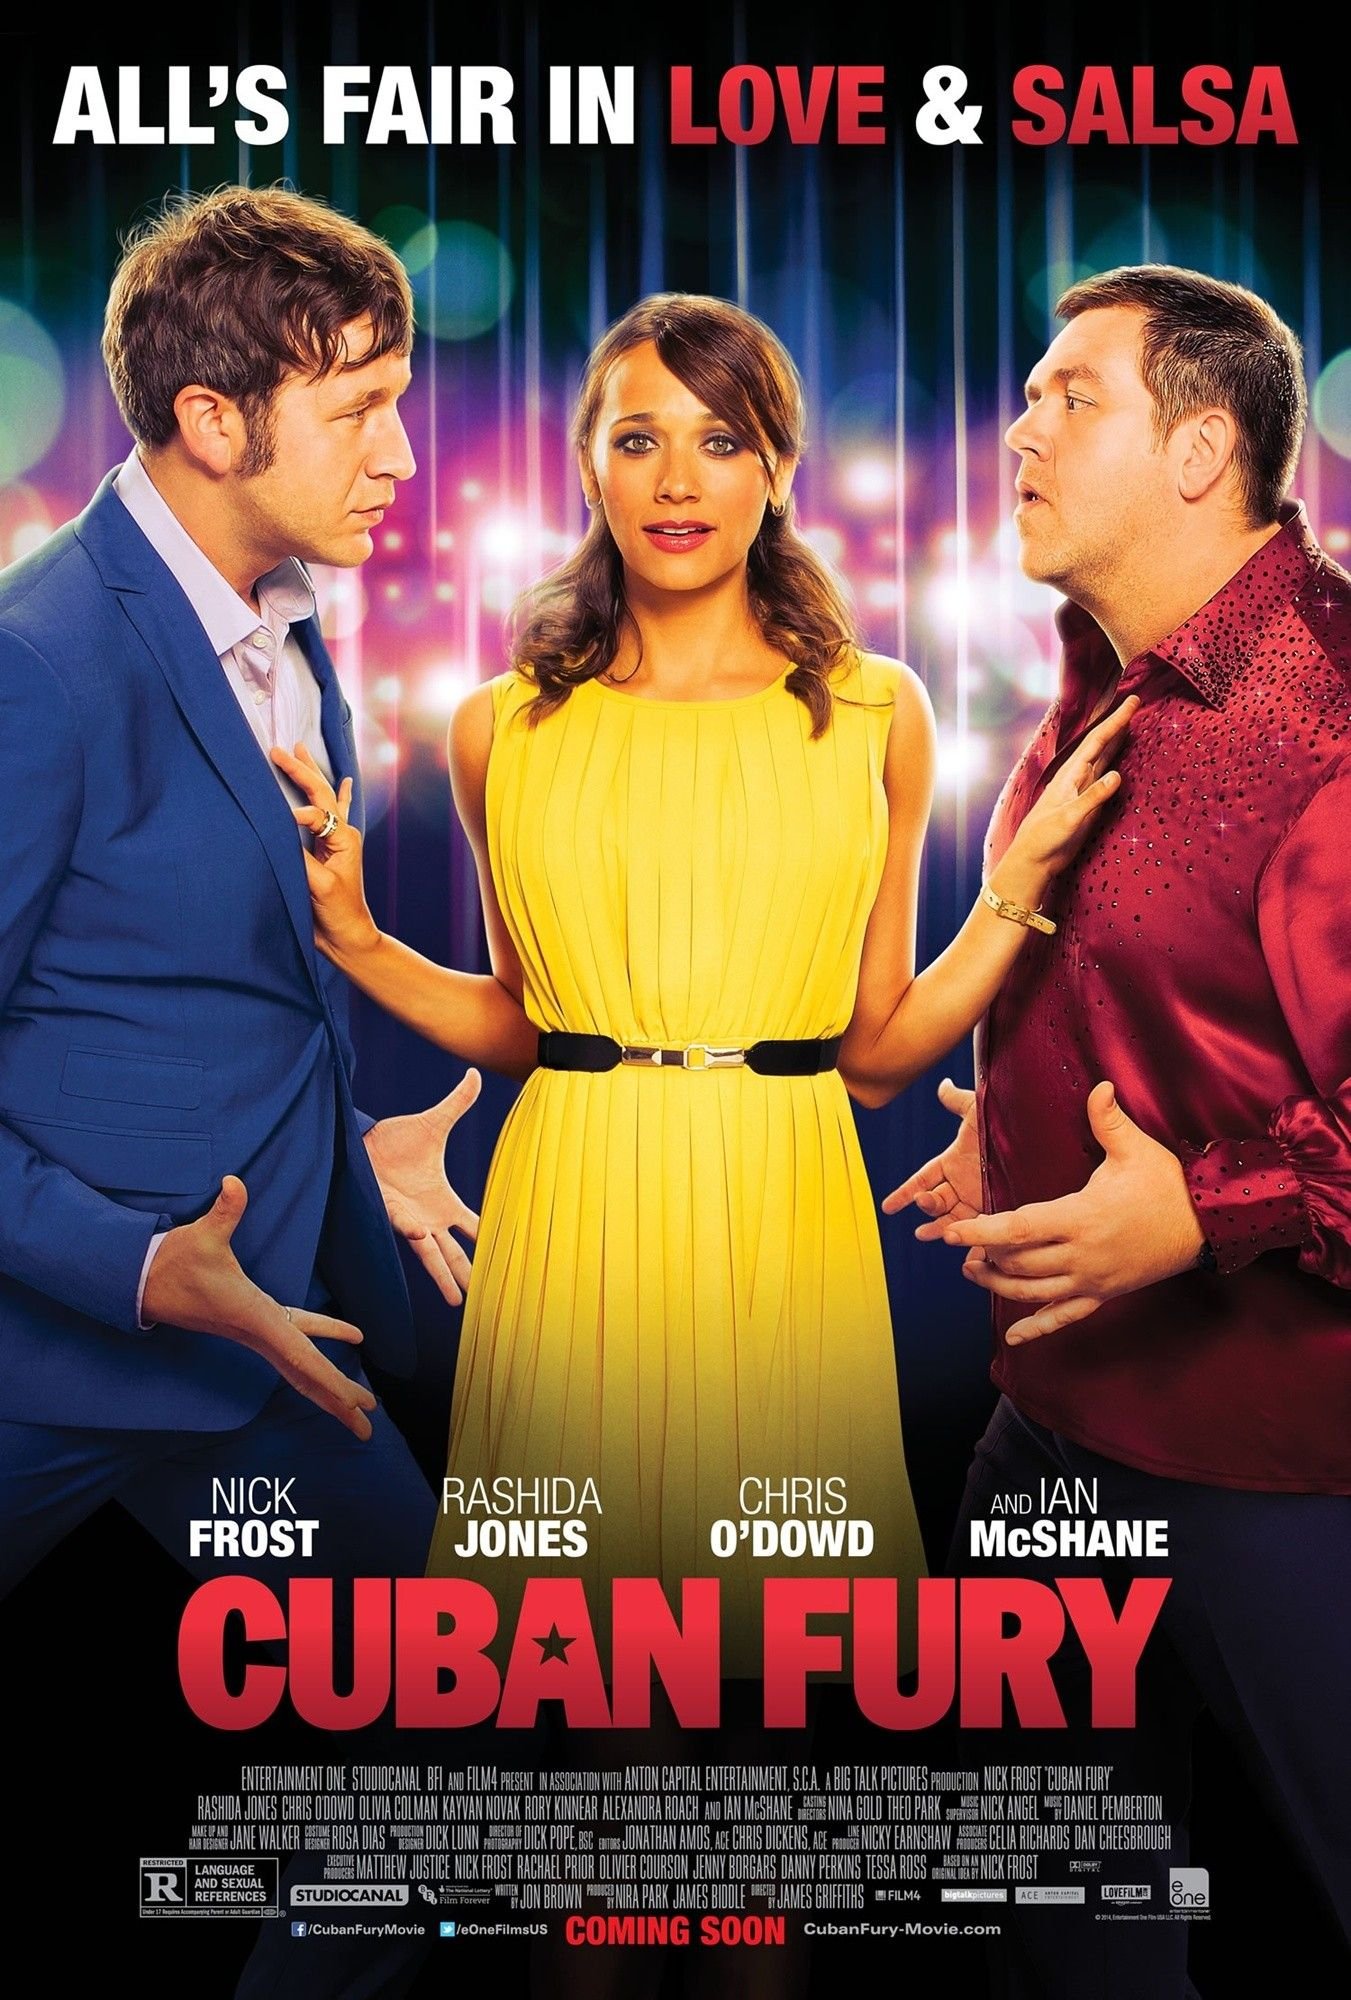 Poster of the movie Cuban Fury